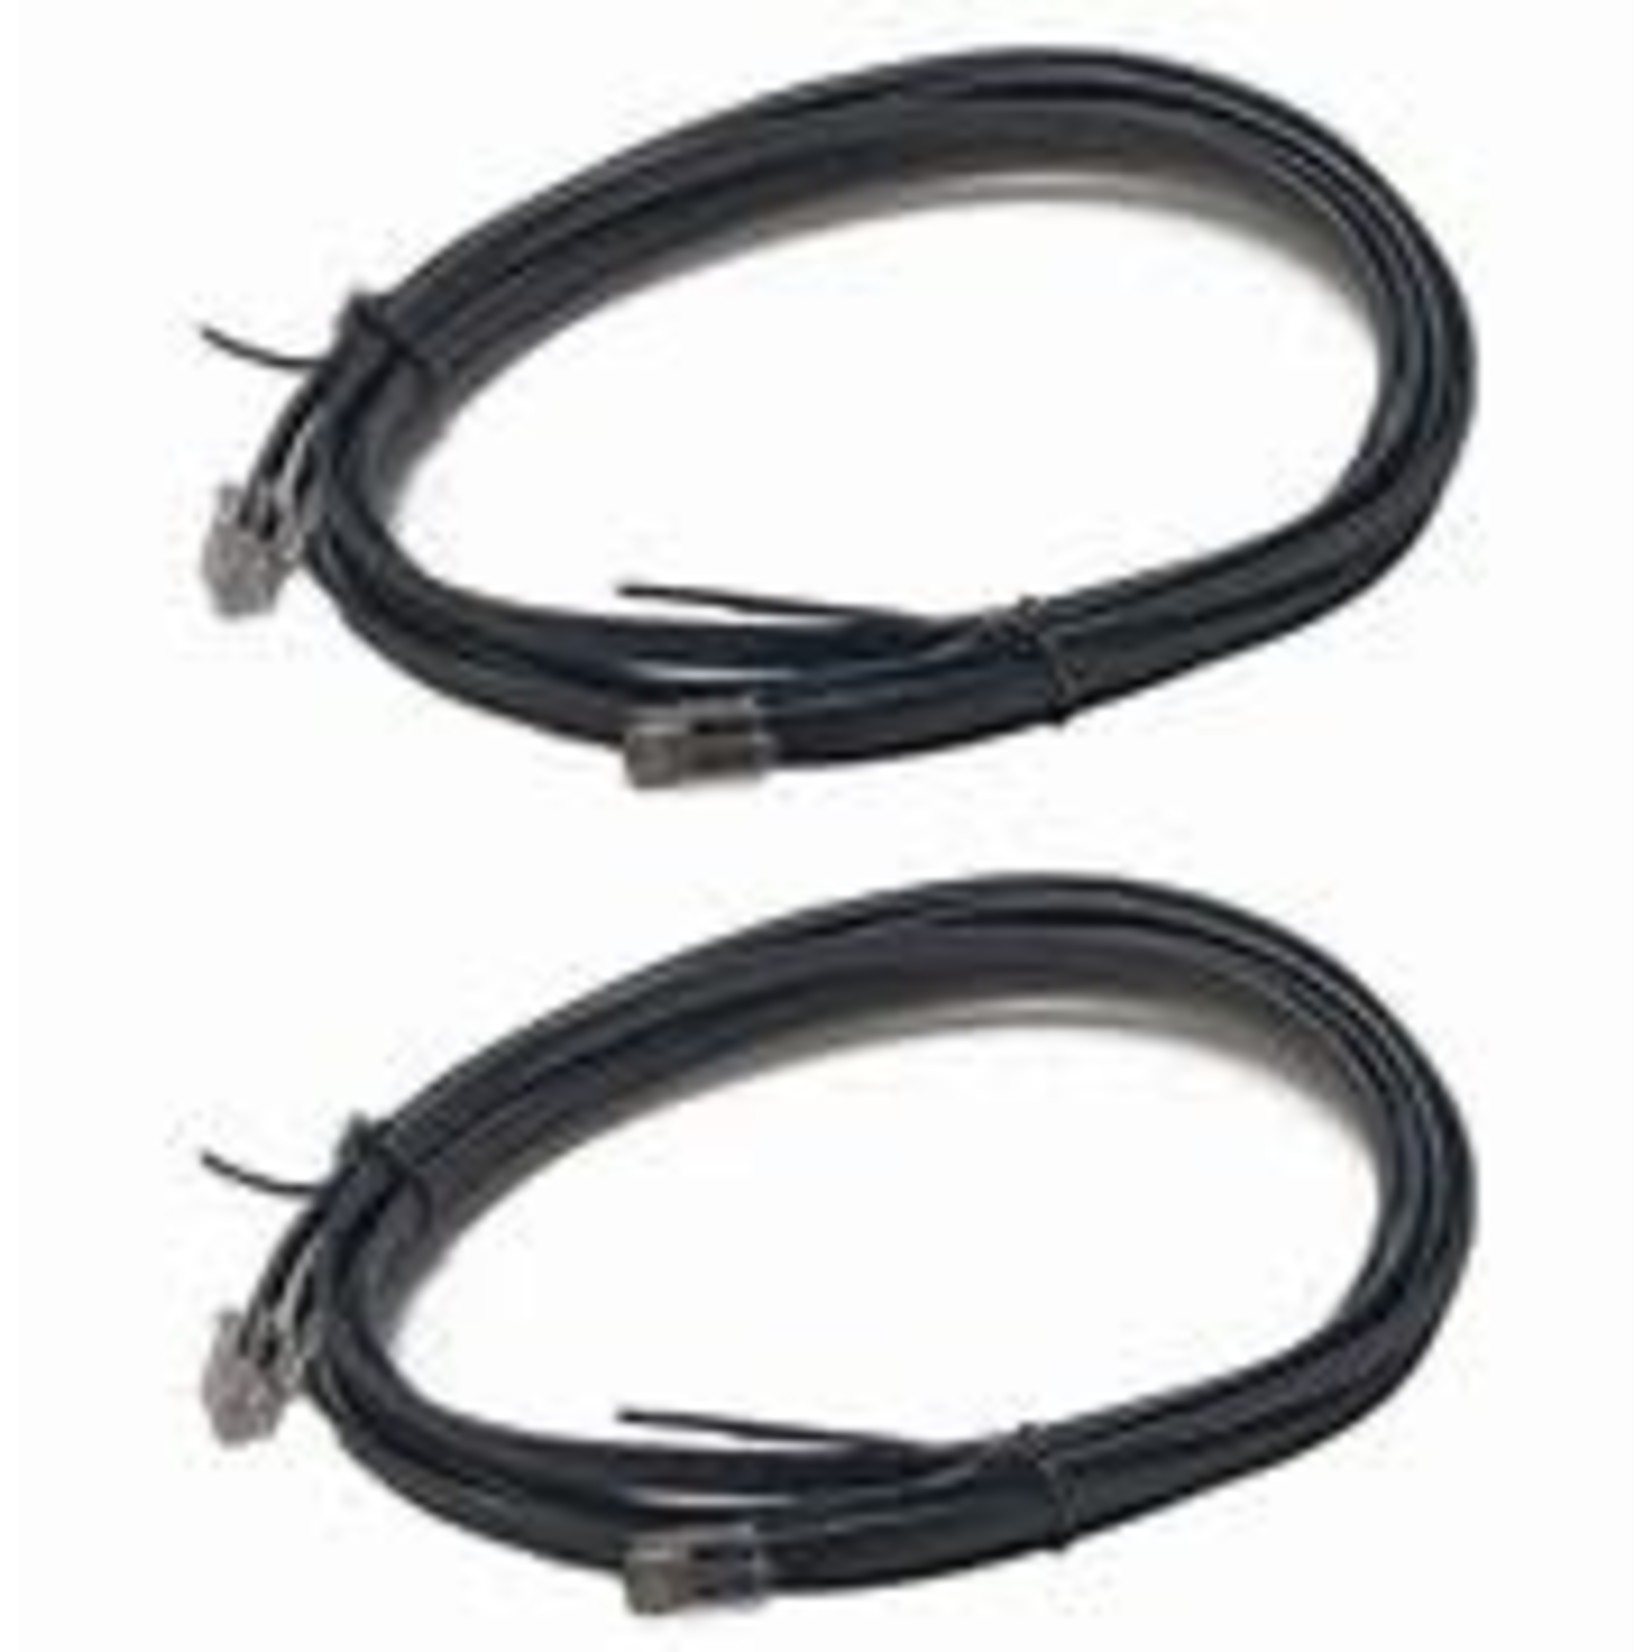 Digitrax LocoNet Cable 2-Pack -- 16'  4.9m